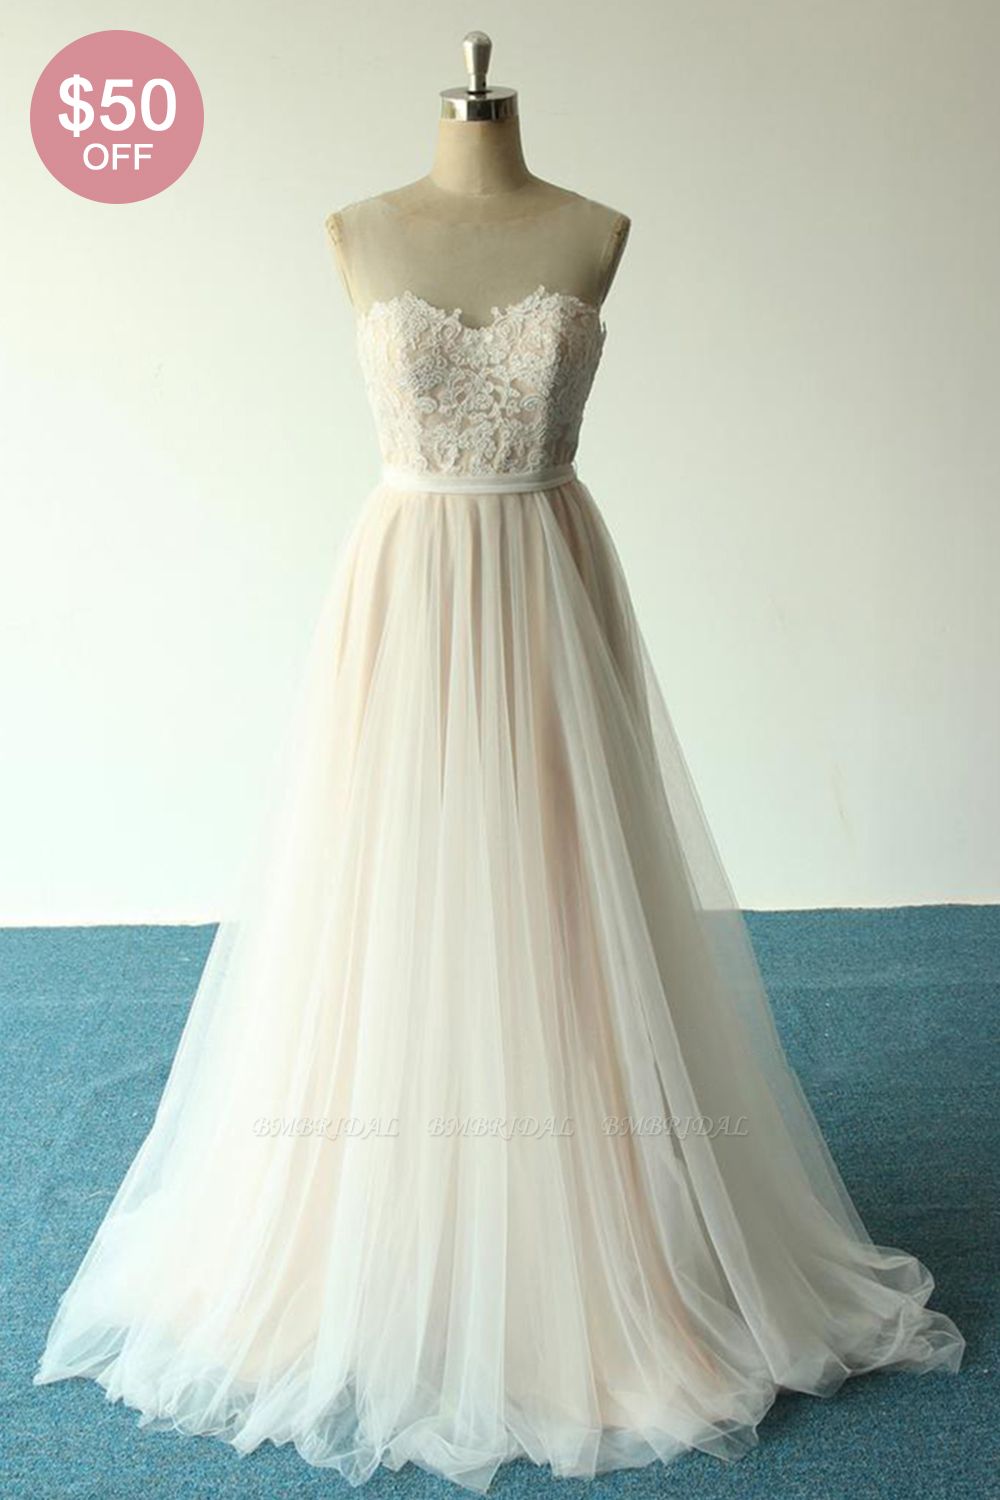 BMbridal Affordable Jewel Sleeveless A-line Wedding Dresses Tulle Lace Bridal Gowns Online